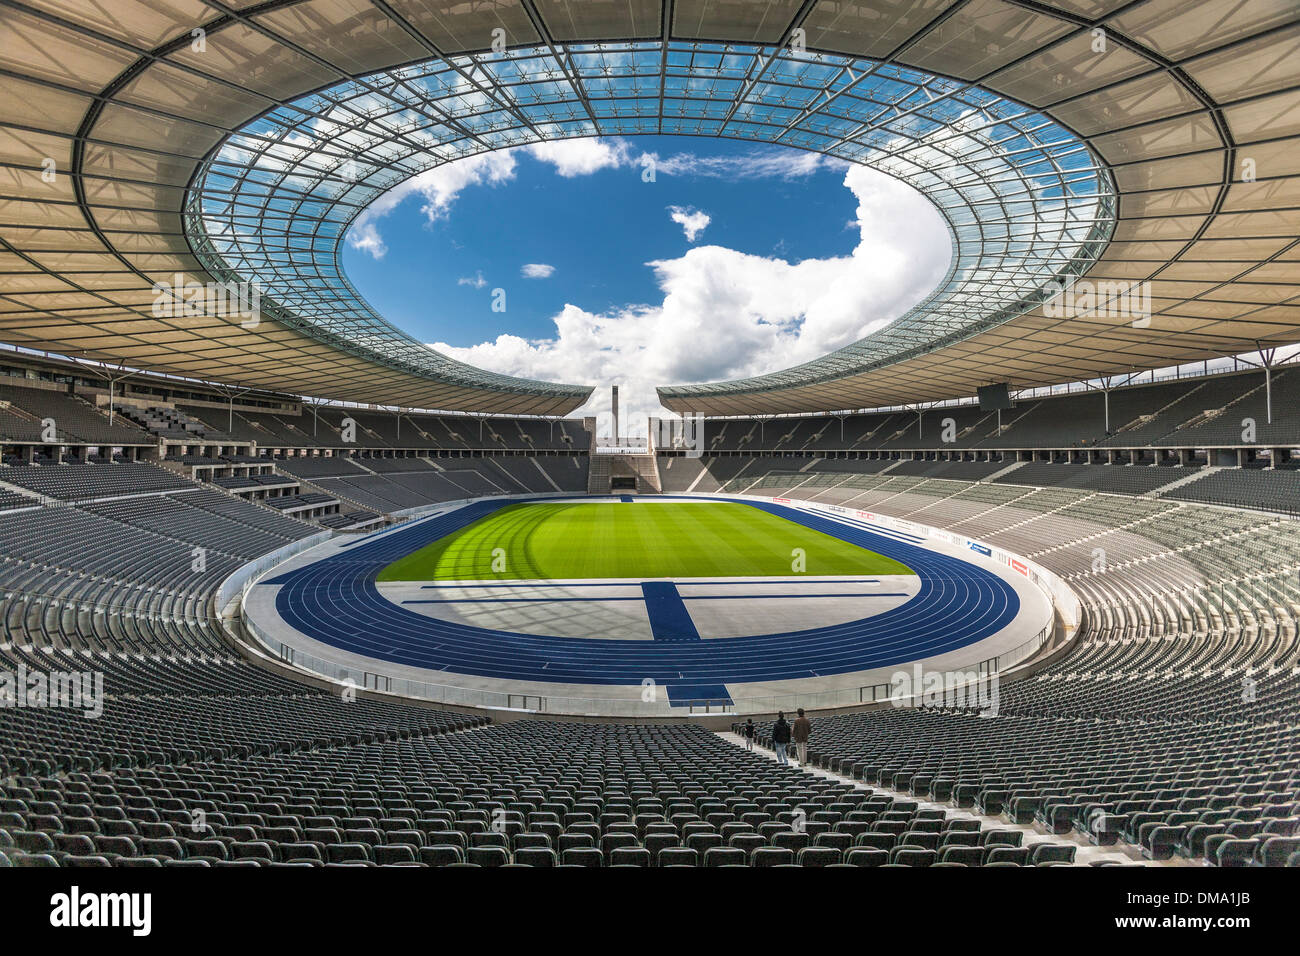 The Olympic Stadium in Berlin, capital of Germany, site of the 1936 Olympic Games, held under the Nazi regime. Stock Photo